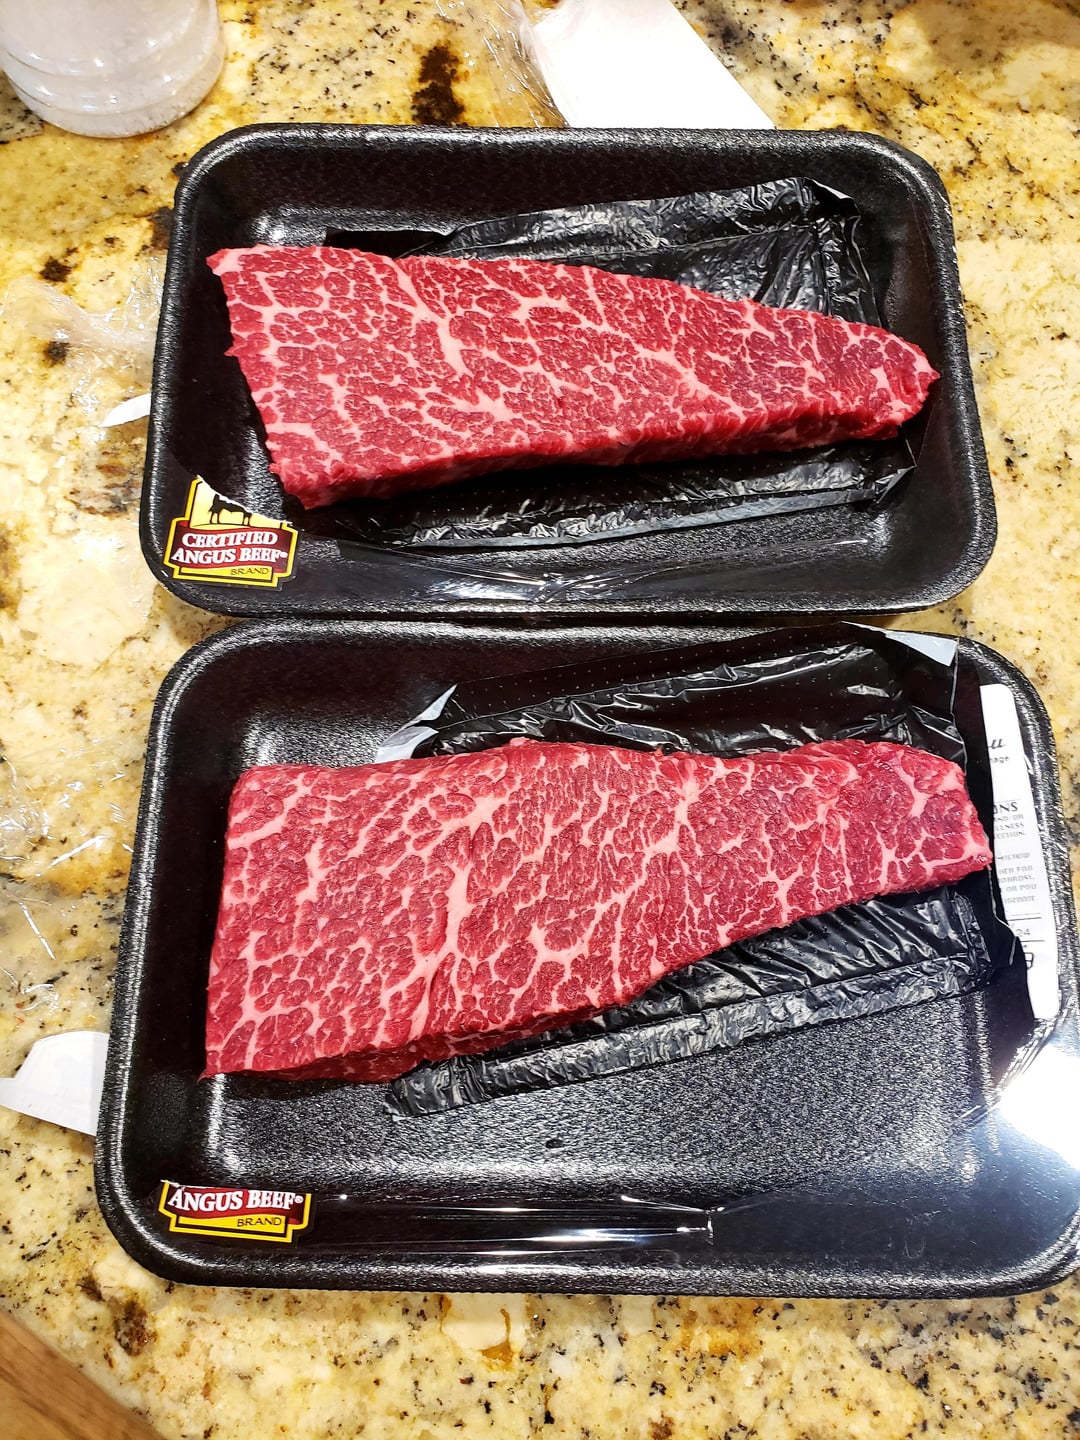 Do these look like $3.50 steaks? - Dining and Cooking